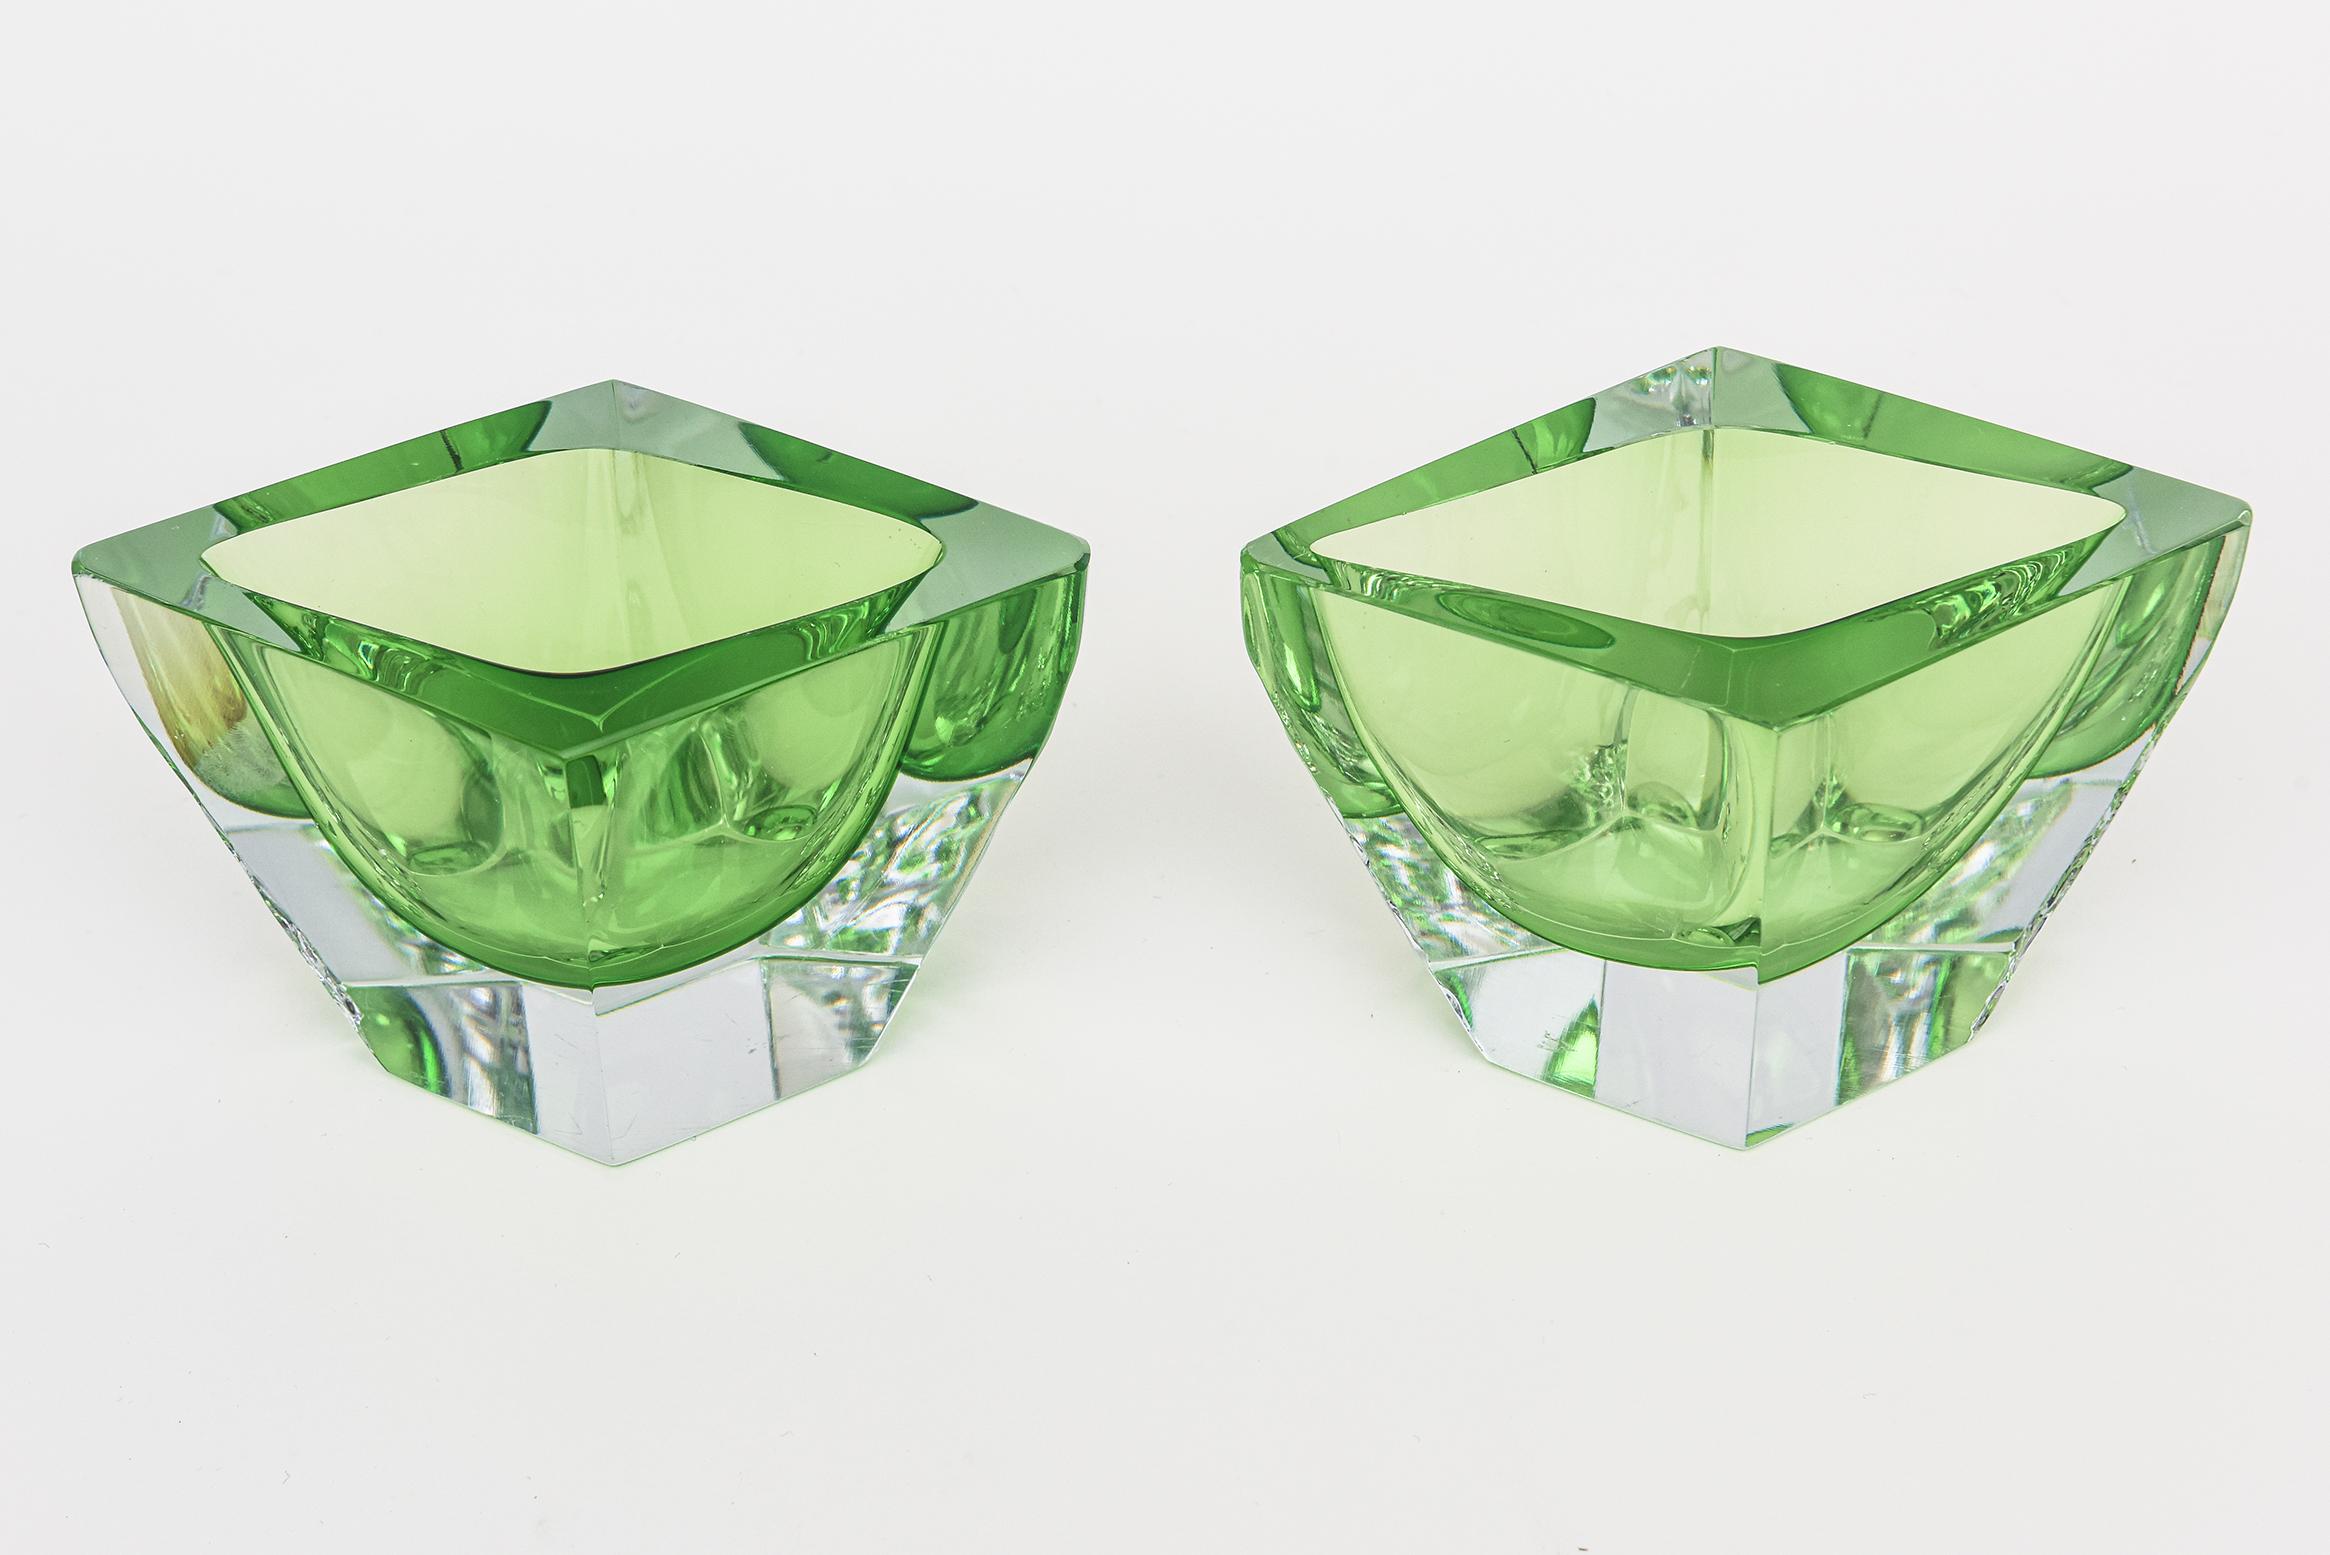 Late 20th Century Vintage Murano Kelly Green Mandruzzato Angled Pebbled Glass Bowls Barware Pair  For Sale